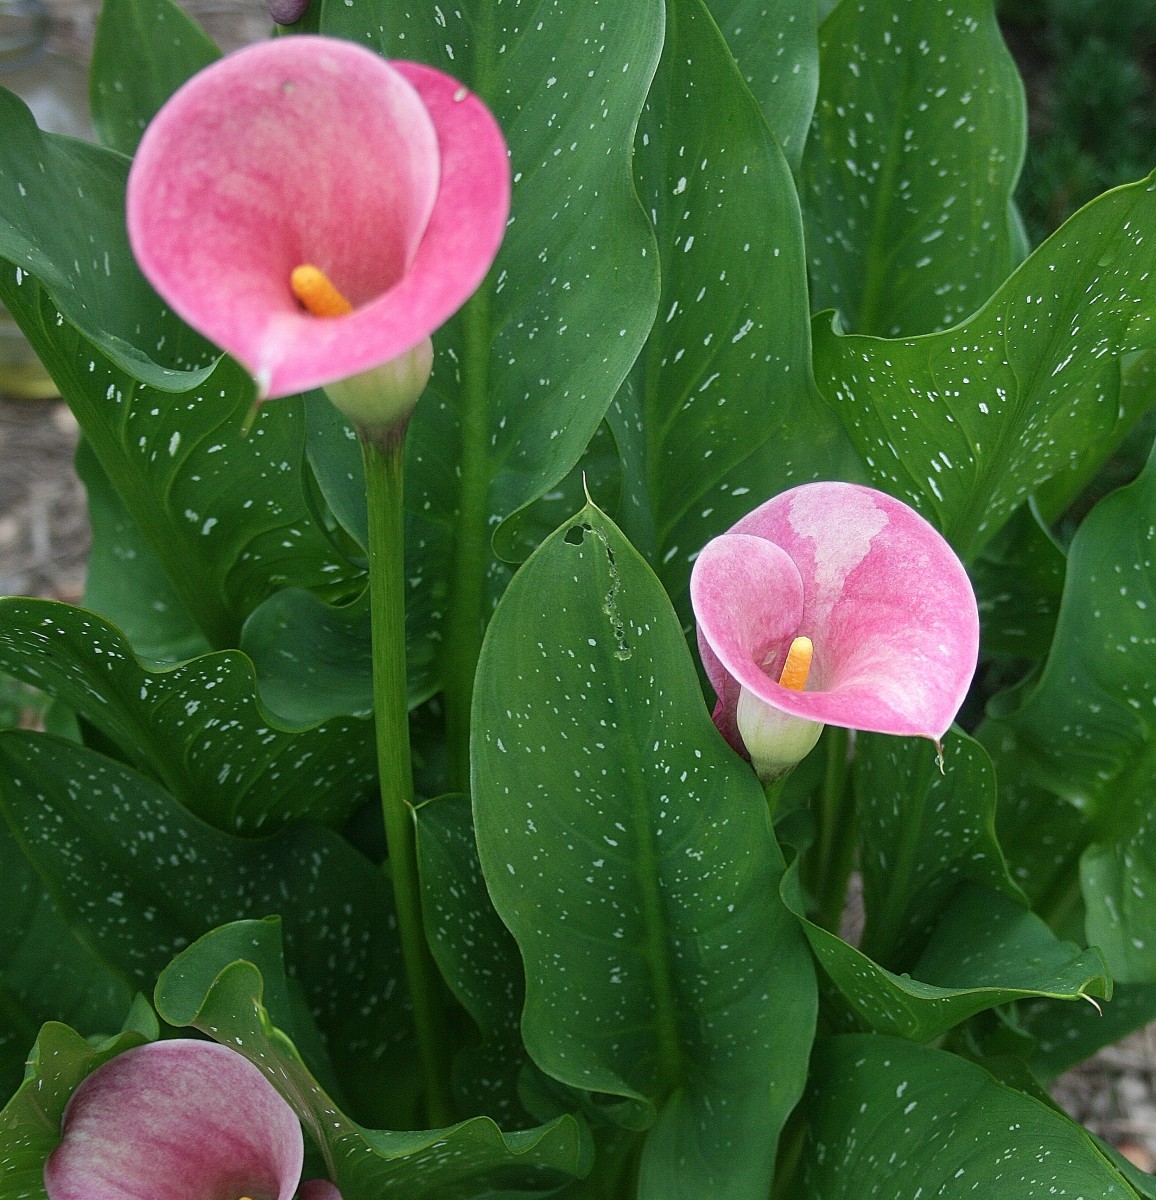 Once established, calla lilies will grow larger each year, producing more and more flowers.